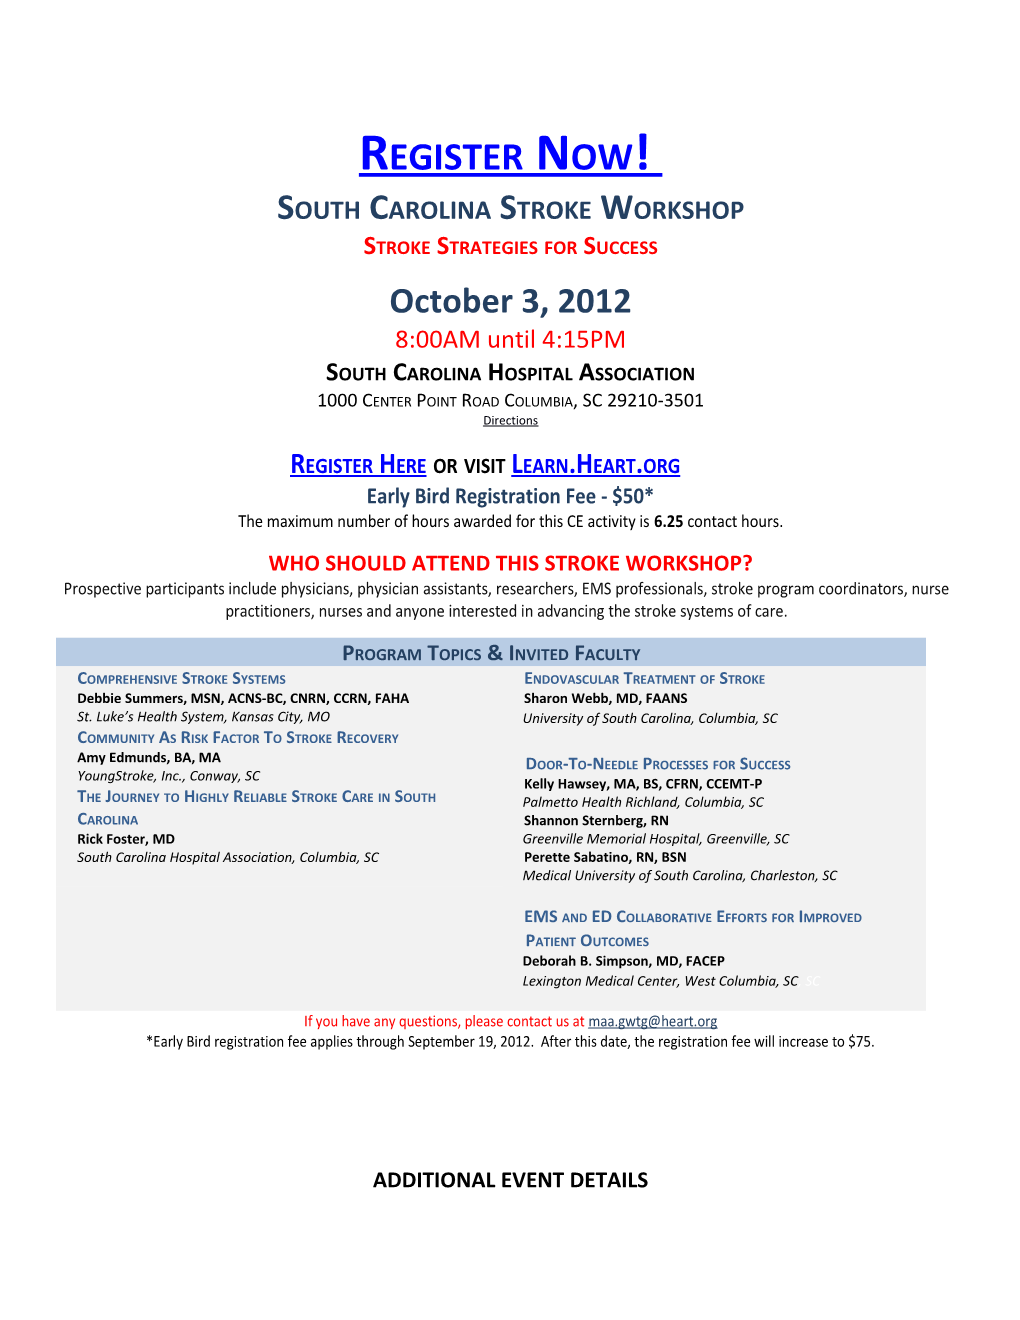 Register Online Now for This Accredited GWTG Stroke Workshop